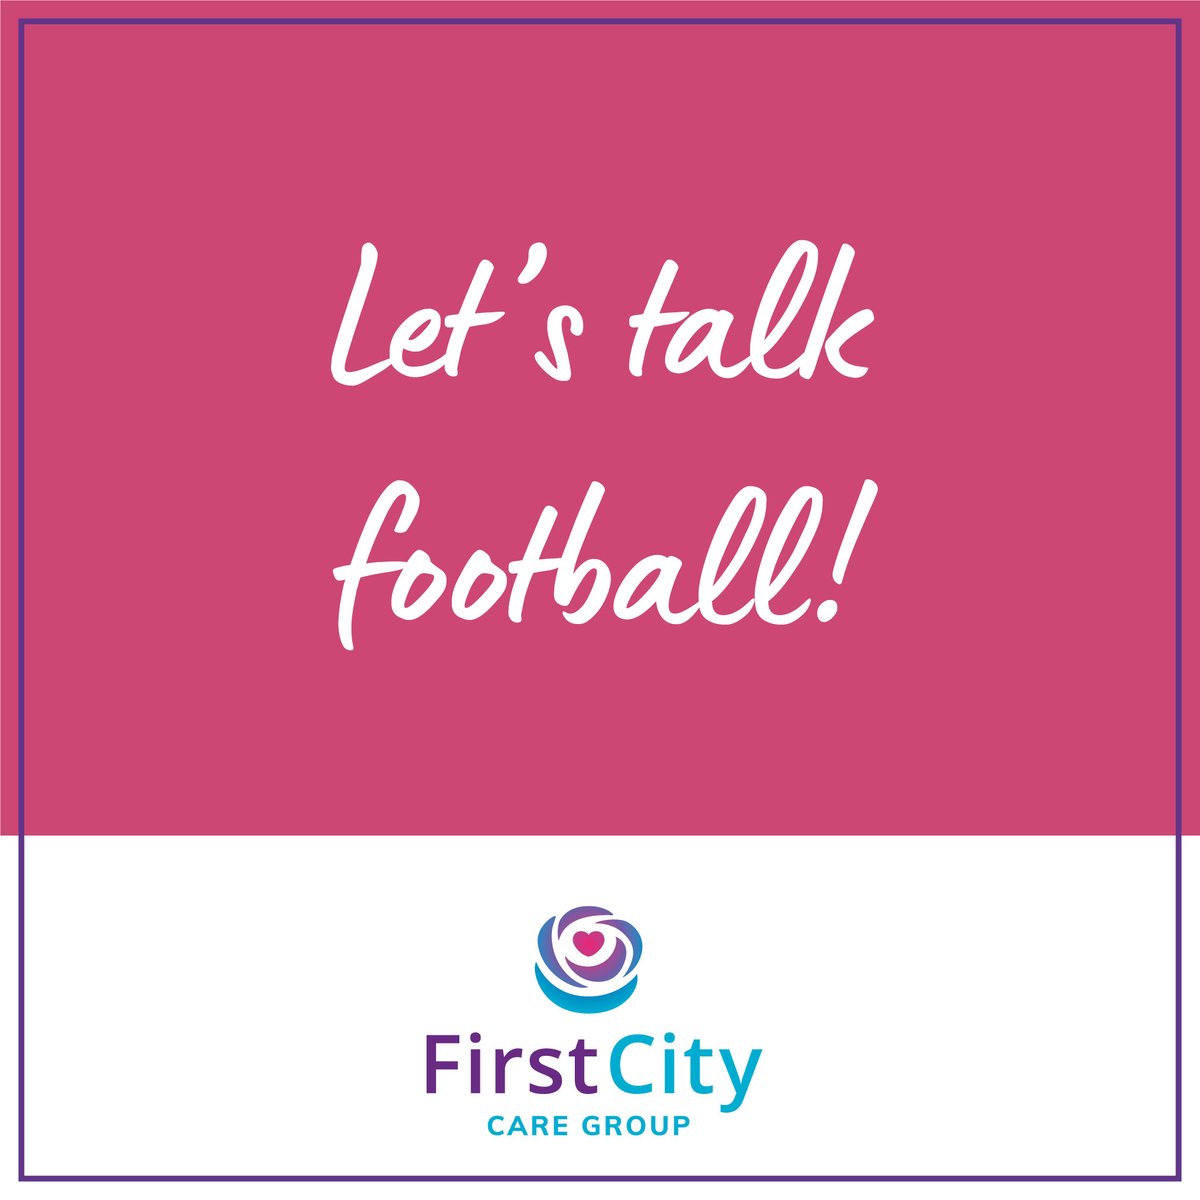 Let's talk football - are you a fan? Let us know which team you follow in the comments below!..

#TuesdayThoughts #TuesdayTopic #Gettoknowyourcolleagues #gettoknowme #Shareyourthoughts